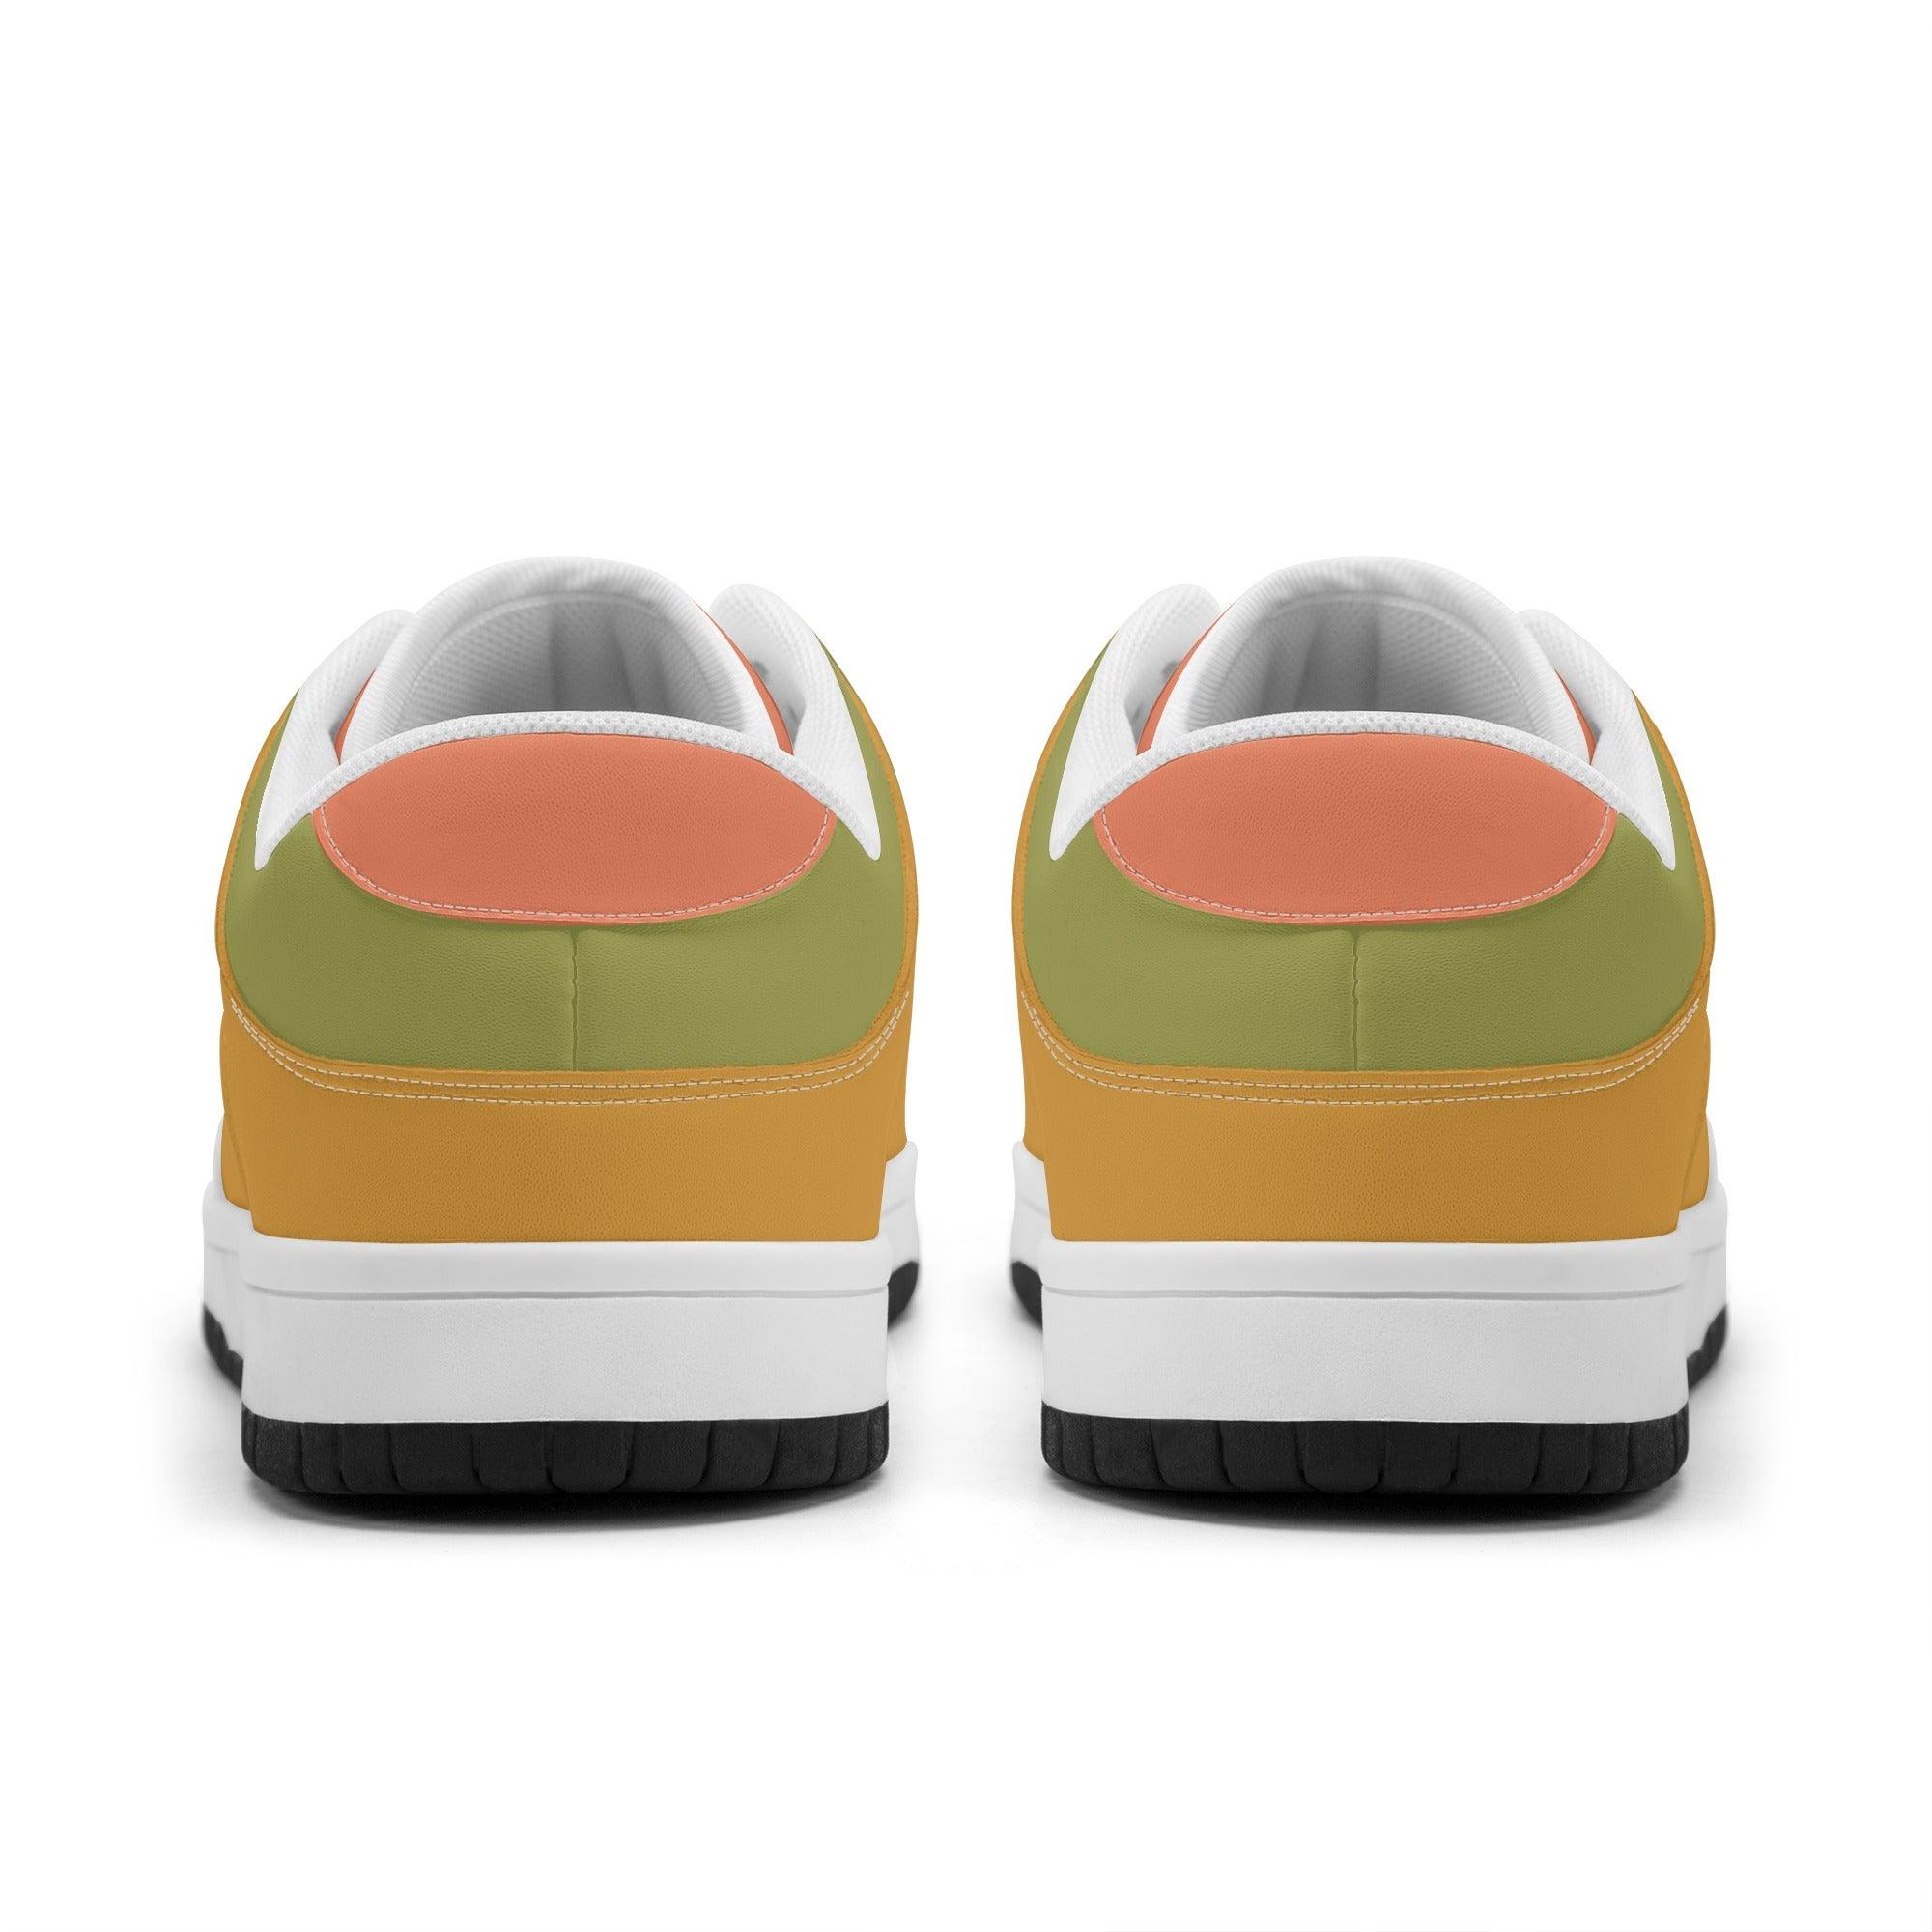 Jana Tri-color Low Top Sneakers - Blissfully Brand